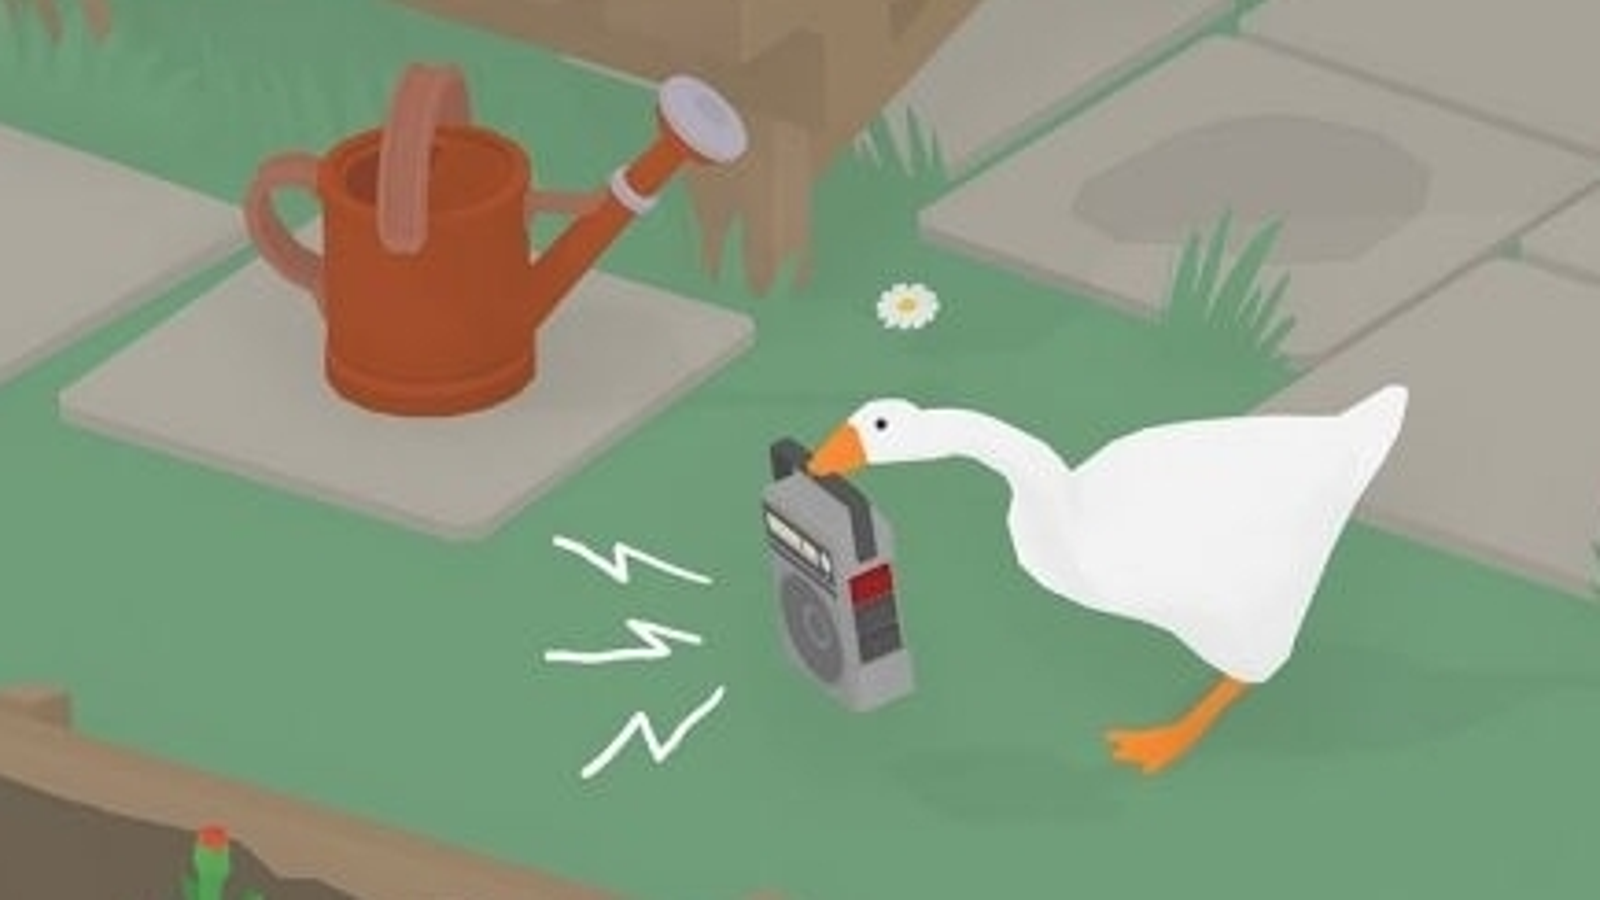 Untitled Goose Game heading to PlayStation, Xbox and possibly